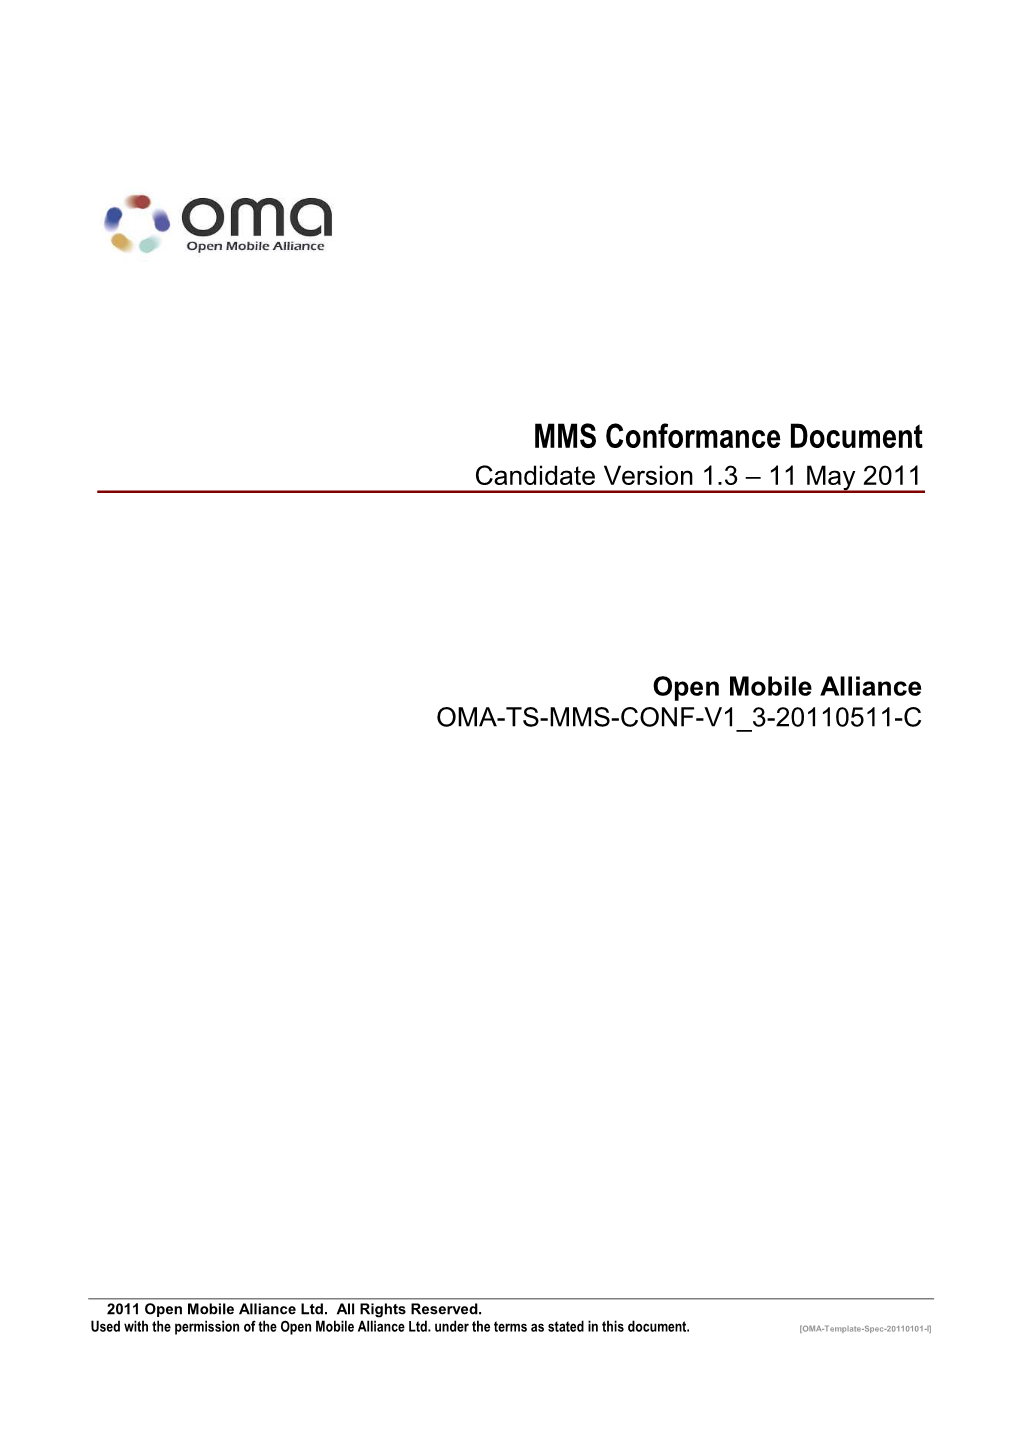 MMS Conformance Document Candidate Version 1.3 – 11 May 2011